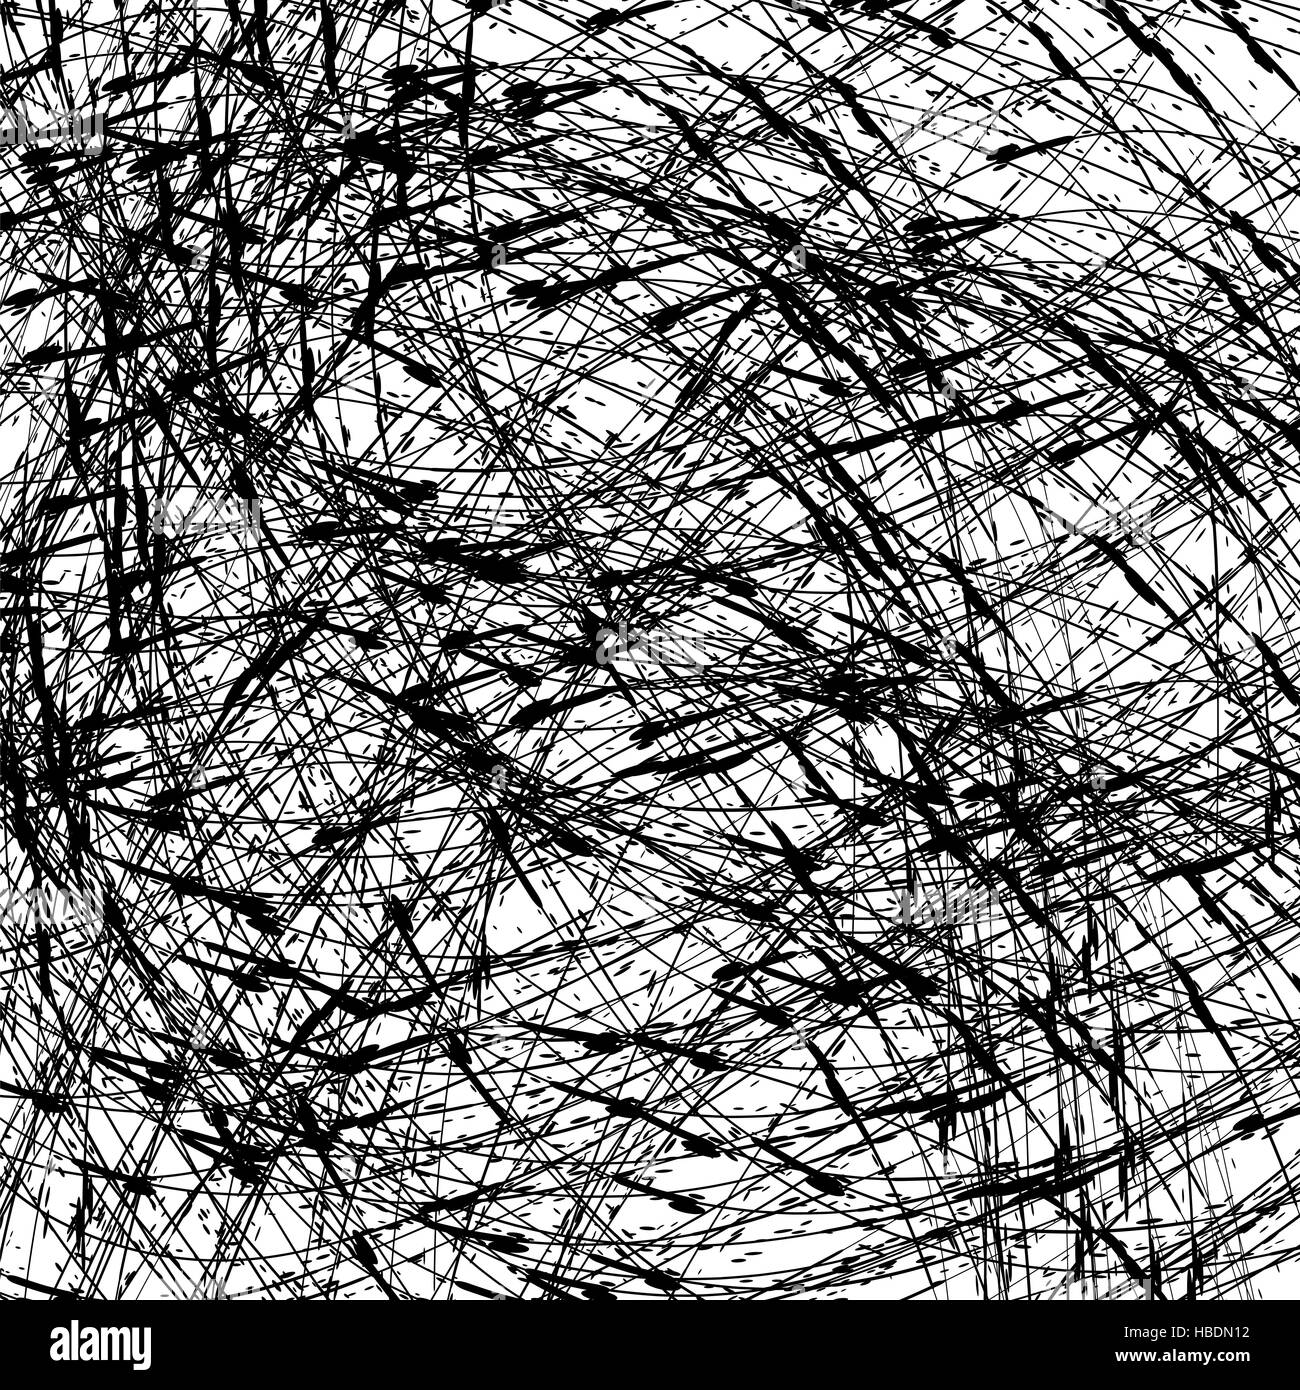 Abstract Grunge Texture. Black Ink Background Stock Photo